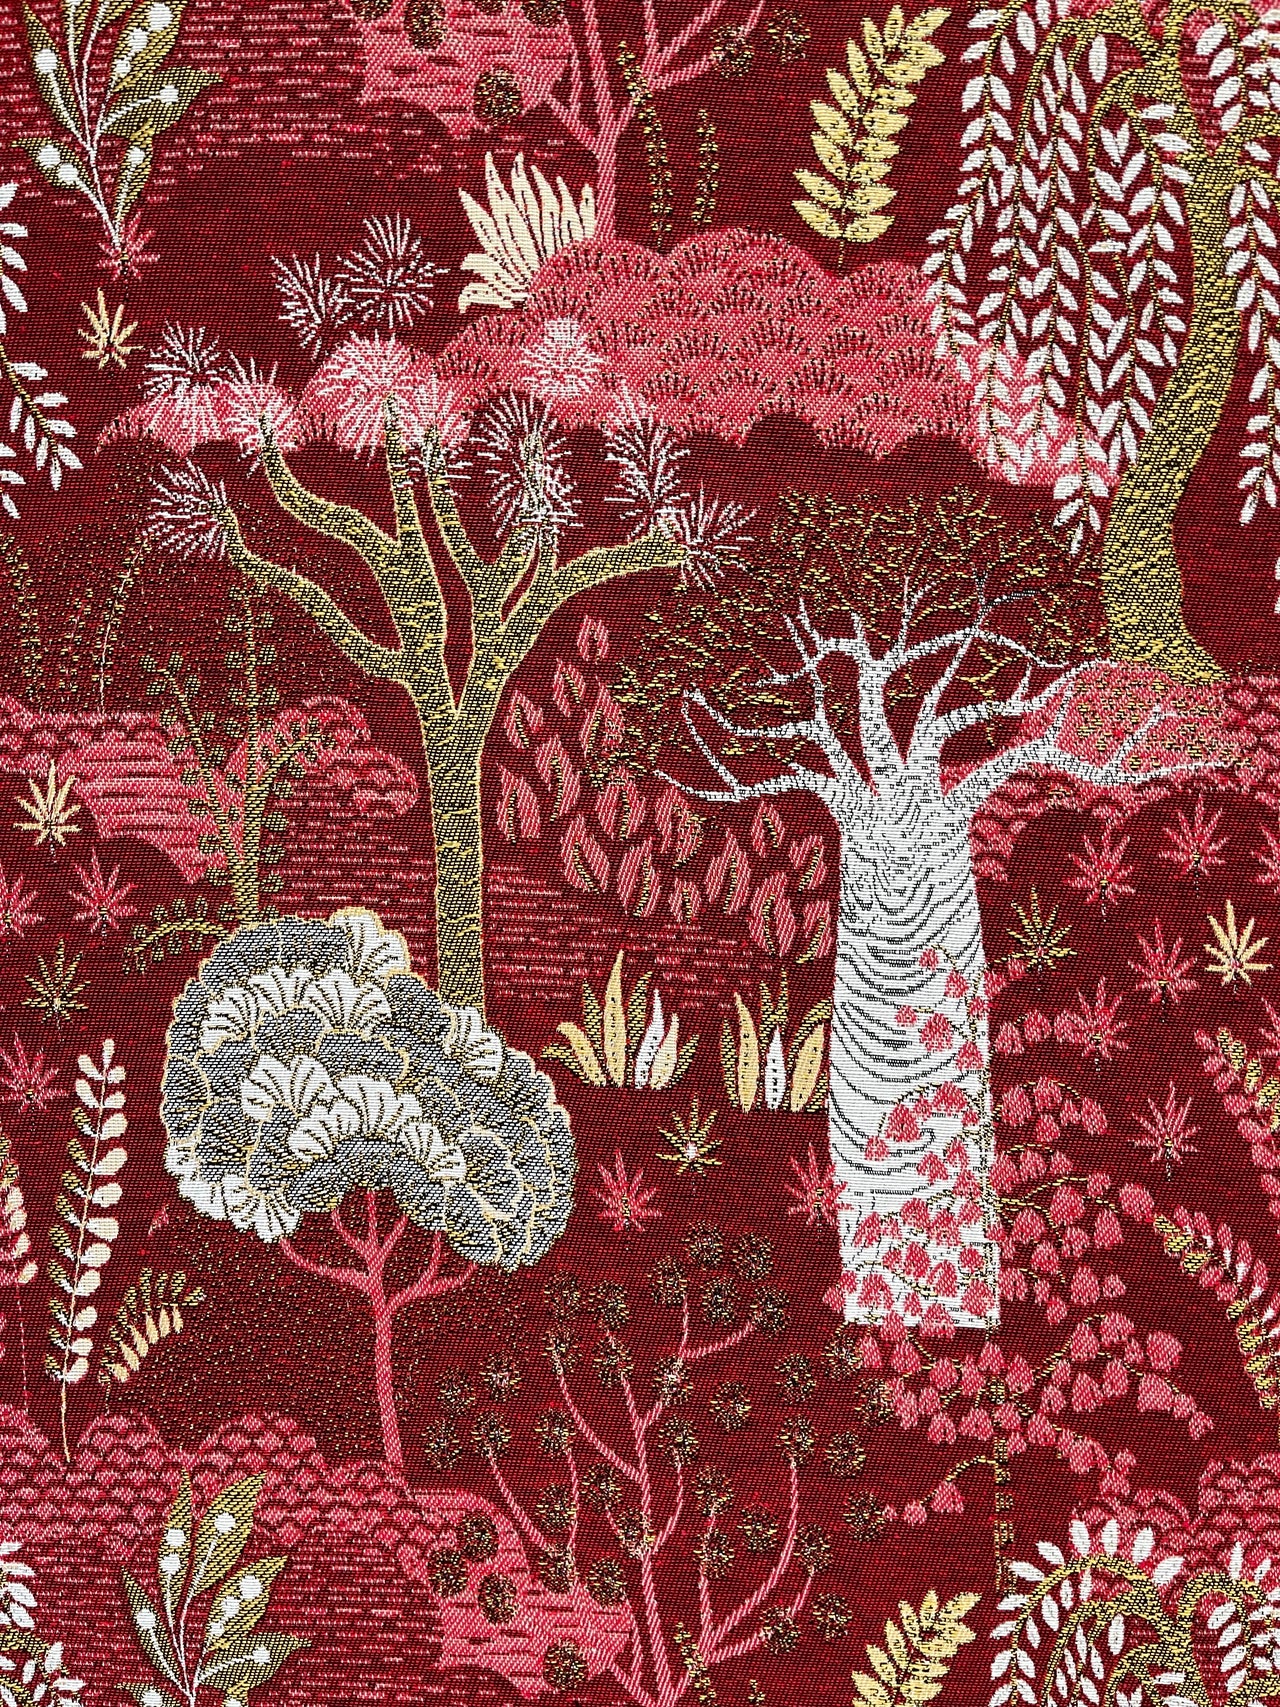 Baobab Upholstery Fabric Ruby Red Gold Textile Floral Home Curtains Blinds Upholstery